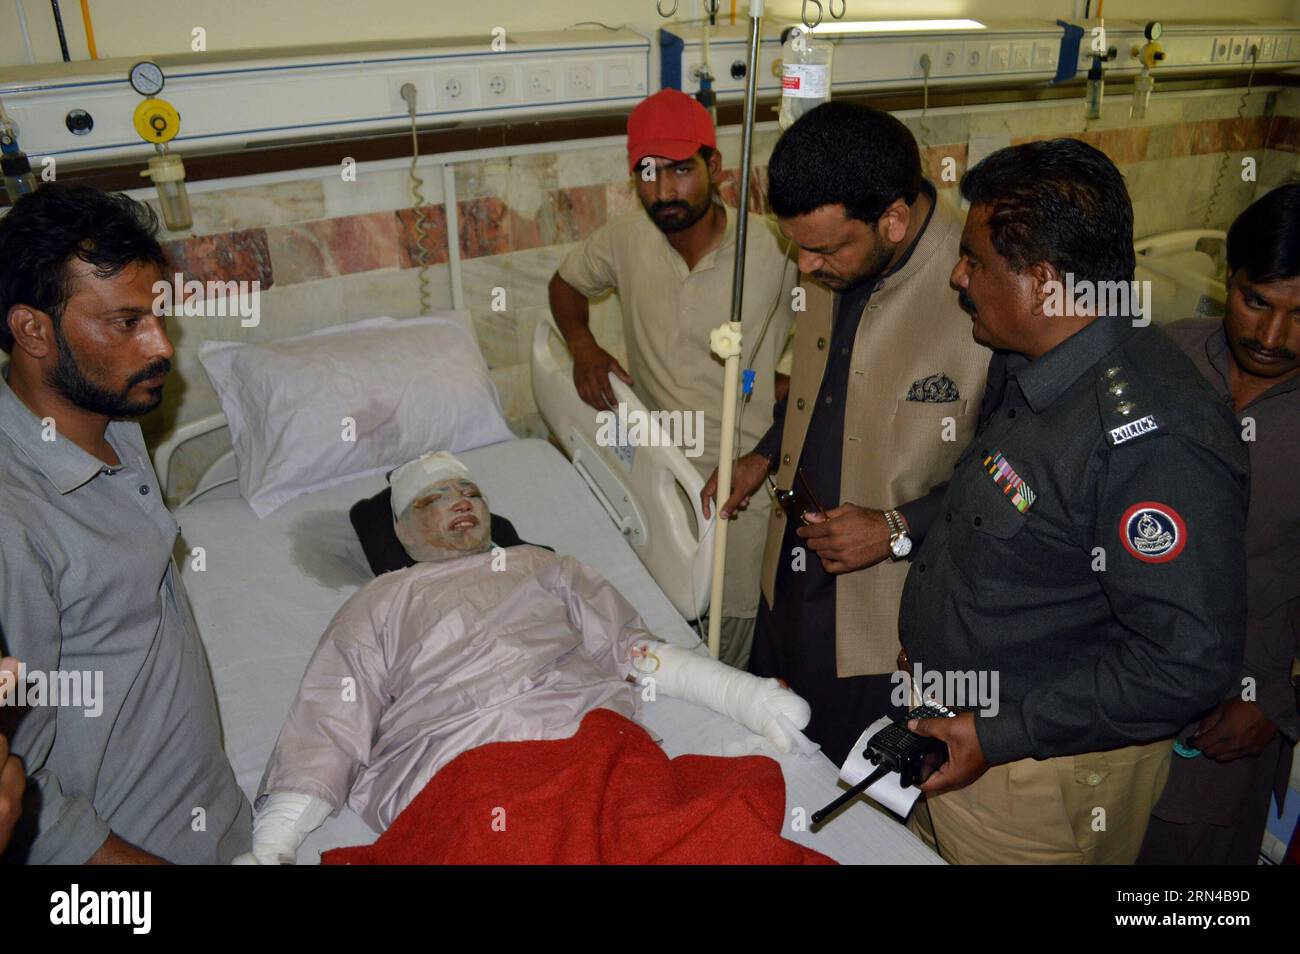 (150515) -- QUETTA, May 15, 2015 -- Police officials record statement of a victim of an acid attack at a hospital in southwest Pakistan s Quetta, May 15, 2015. Two women, including a teenager, sustained severe burn injuries after they were attacked with acid in Quetta, local media reported. ) PAKISTAN-QUETTA-ACID-ATTACK Asad PUBLICATIONxNOTxINxCHN   Quetta May 15 2015 Police Officials Record Statement of a Victim of to Acid Attack AT a Hospital in Southwest Pakistan S Quetta May 15 2015 Two Women including a Teenagers sustained severe Burn injuries After They Were attacked With Acid in Quetta Stock Photo